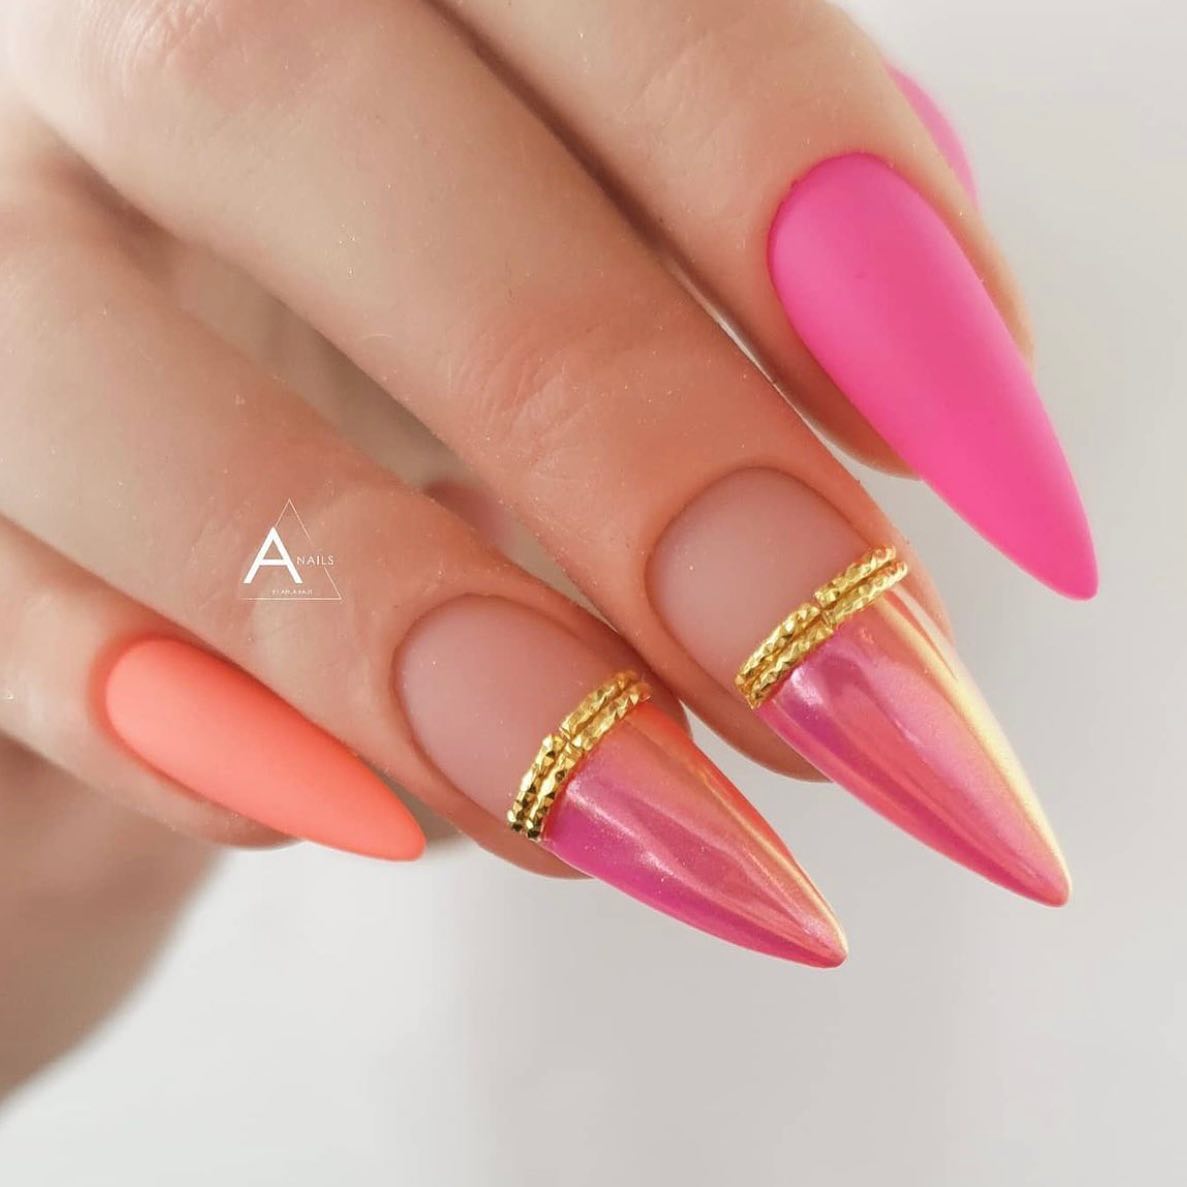 If you want something long and bold consider this ombré mani for any headed event.